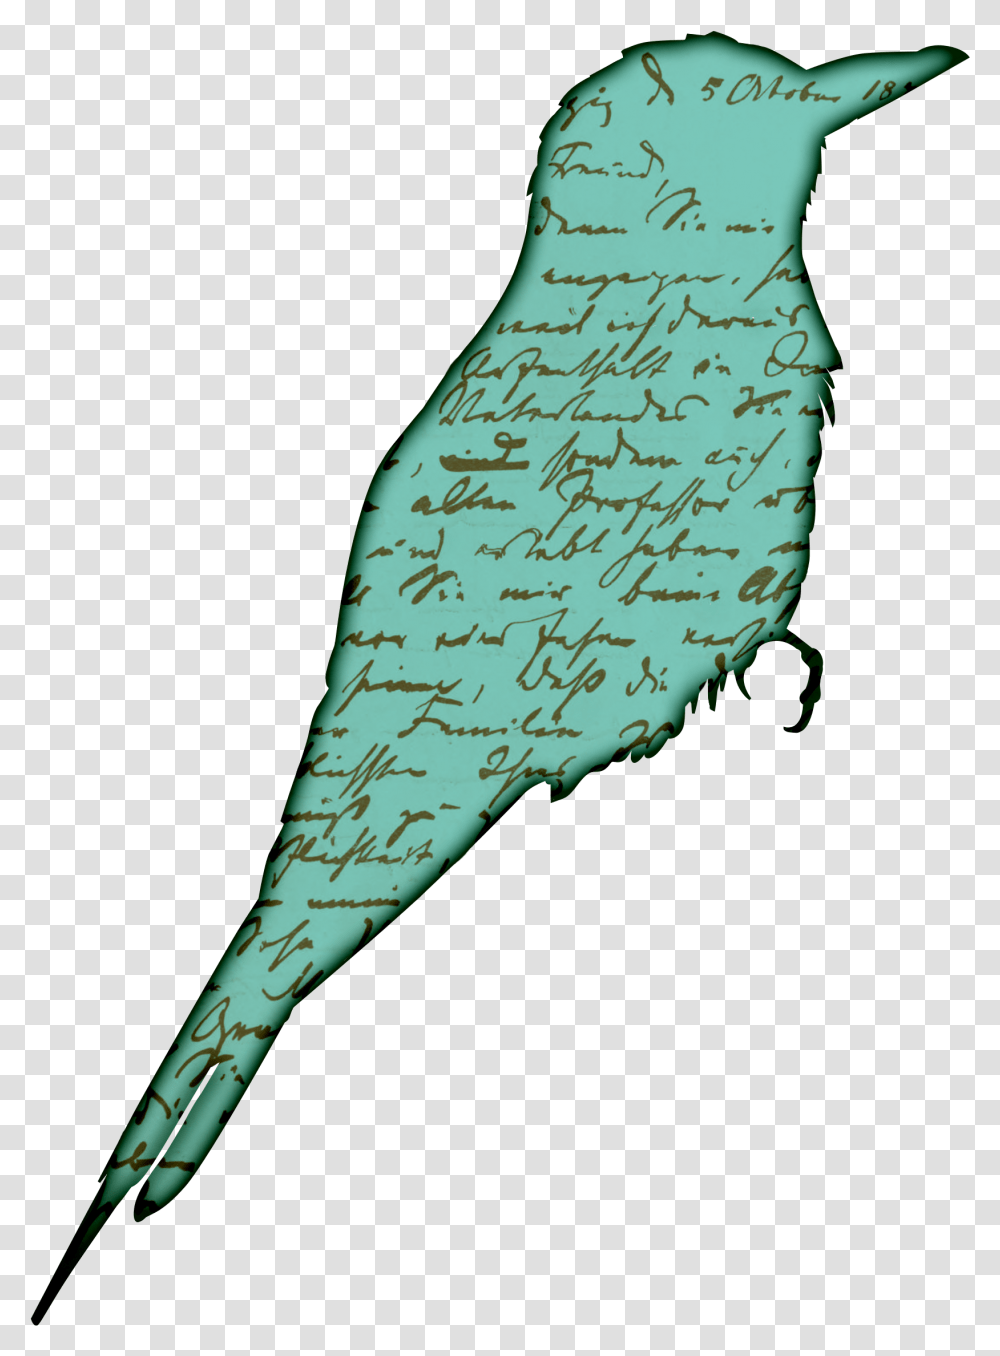 Free Stock Index Of Wp Content Vintage Bird Clipart, Handwriting, Animal, Calligraphy Transparent Png